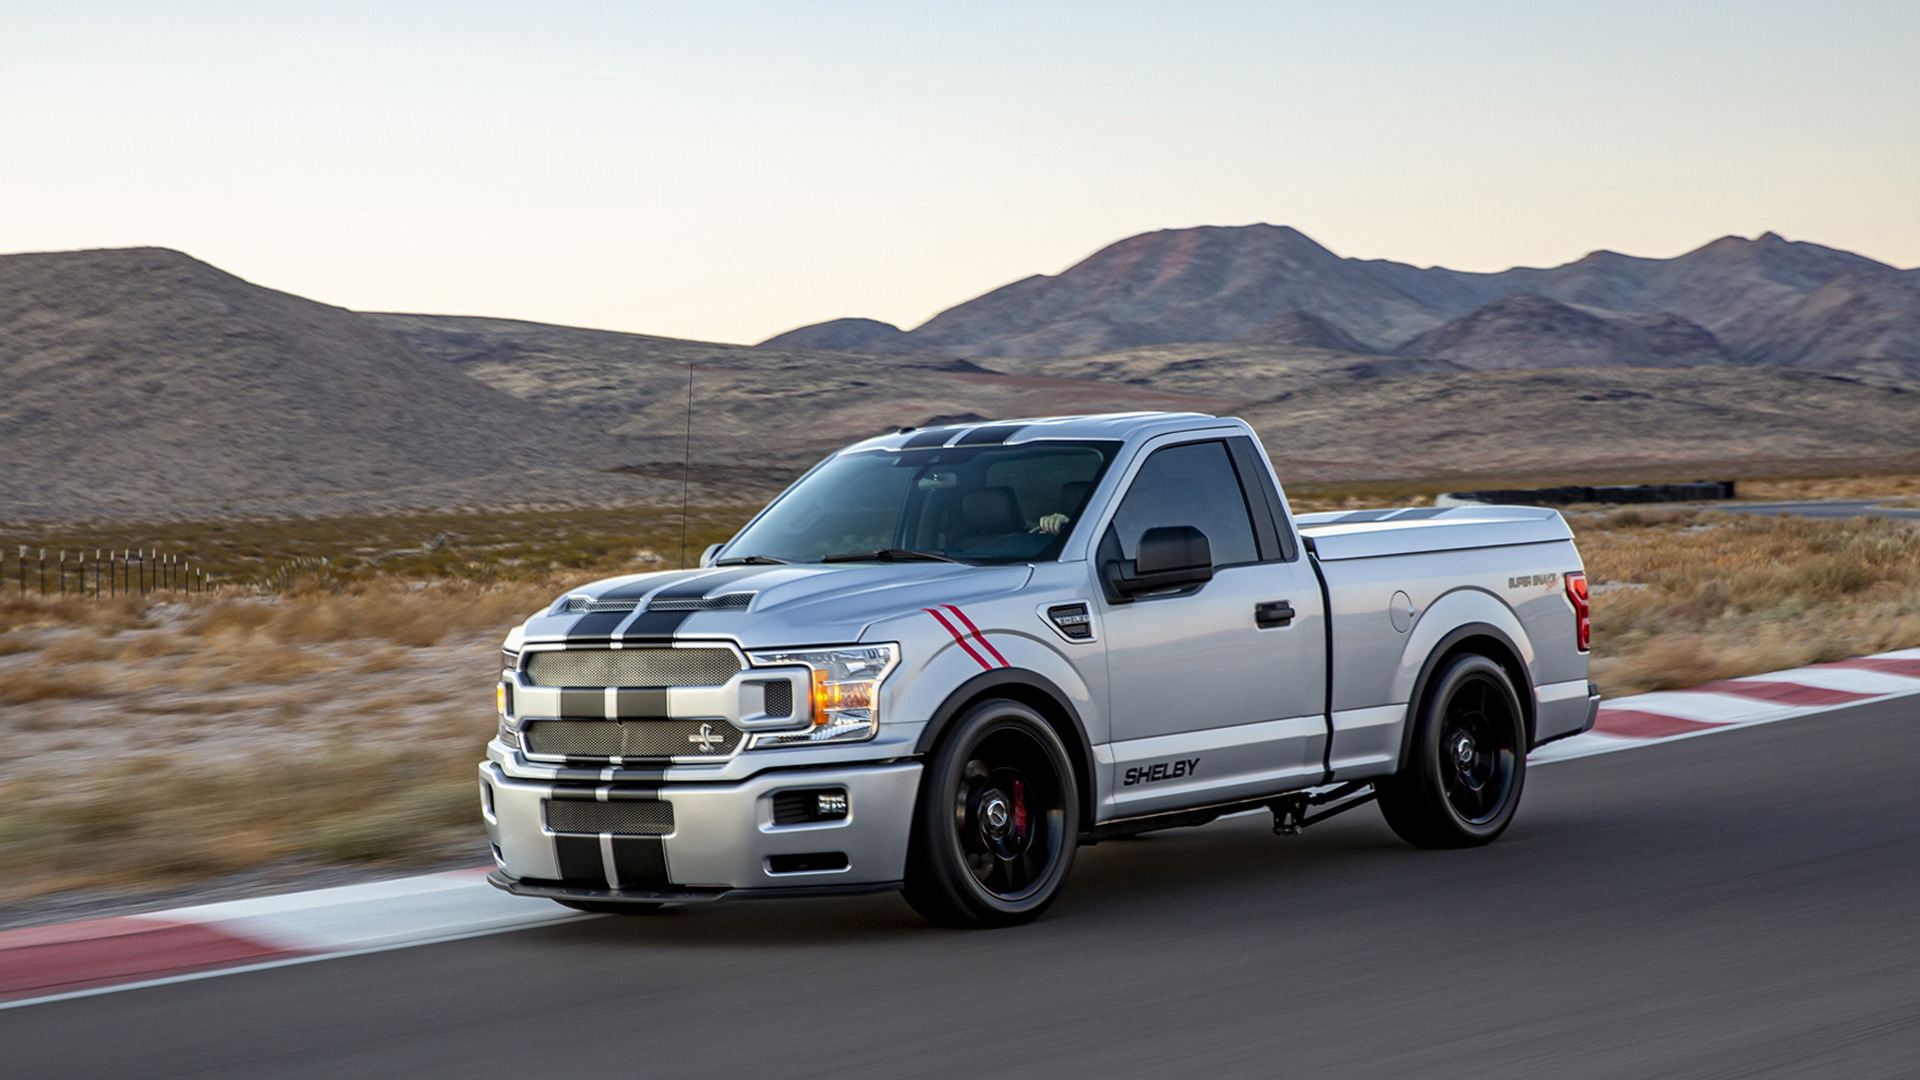 With 770 hp and $93,385 price, the Ford Shelby F-150 Super Snake Sport